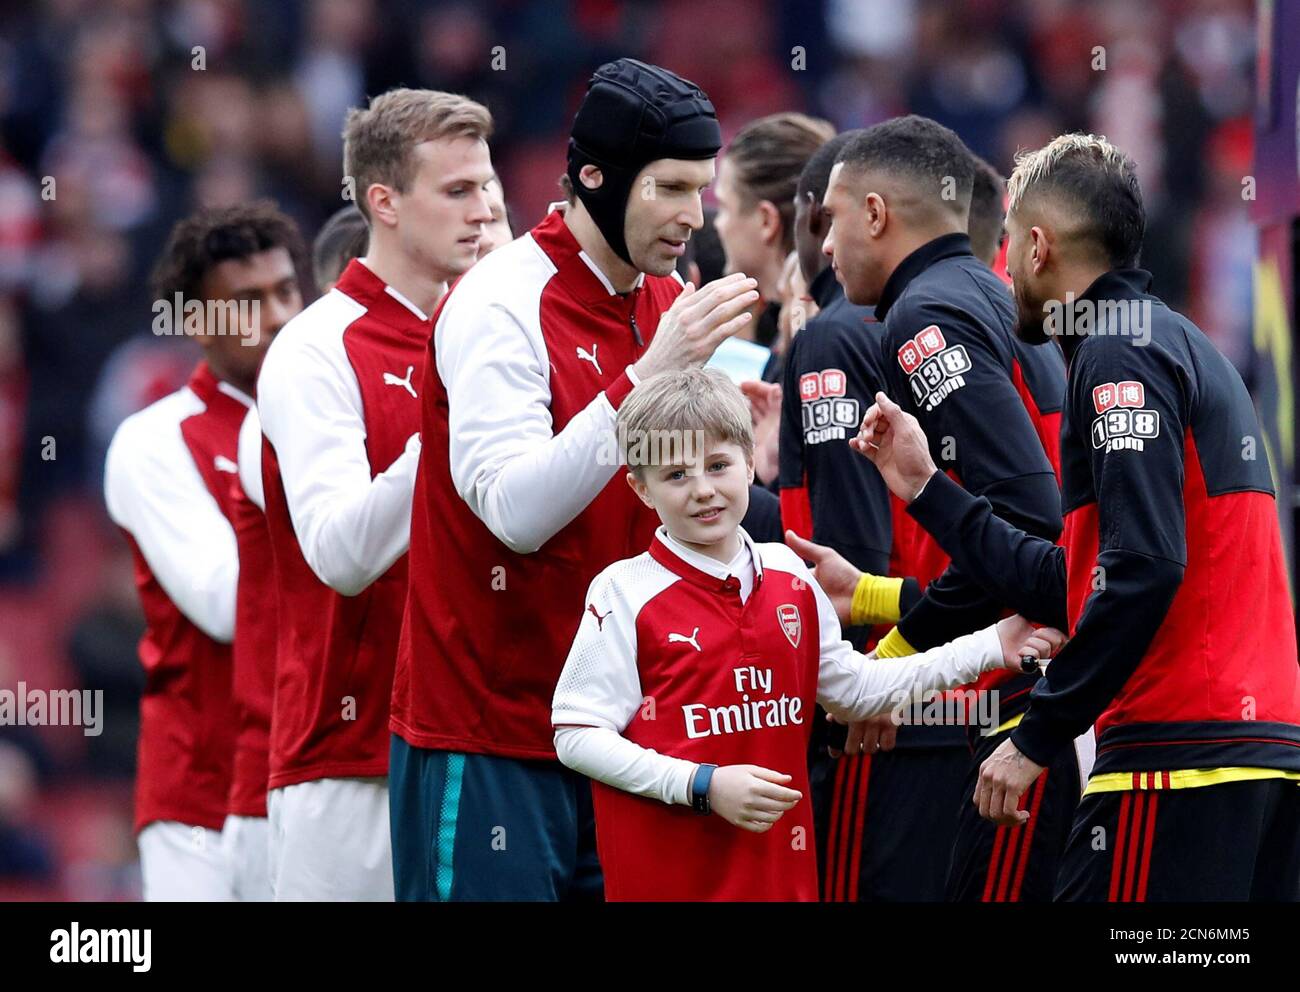 Soccer Football - Premier League - Arsenal vs Watford - Emirates Stadium, London, Britain - March 11, 2018   Arsenal's Petr Cech shakes hands before the match   REUTERS/Eddie Keogh    EDITORIAL USE ONLY. No use with unauthorized audio, video, data, fixture lists, club/league logos or 'live' services. Online in-match use limited to 75 images, no video emulation. No use in betting, games or single club/league/player publications.  Please contact your account representative for further details. Stock Photo